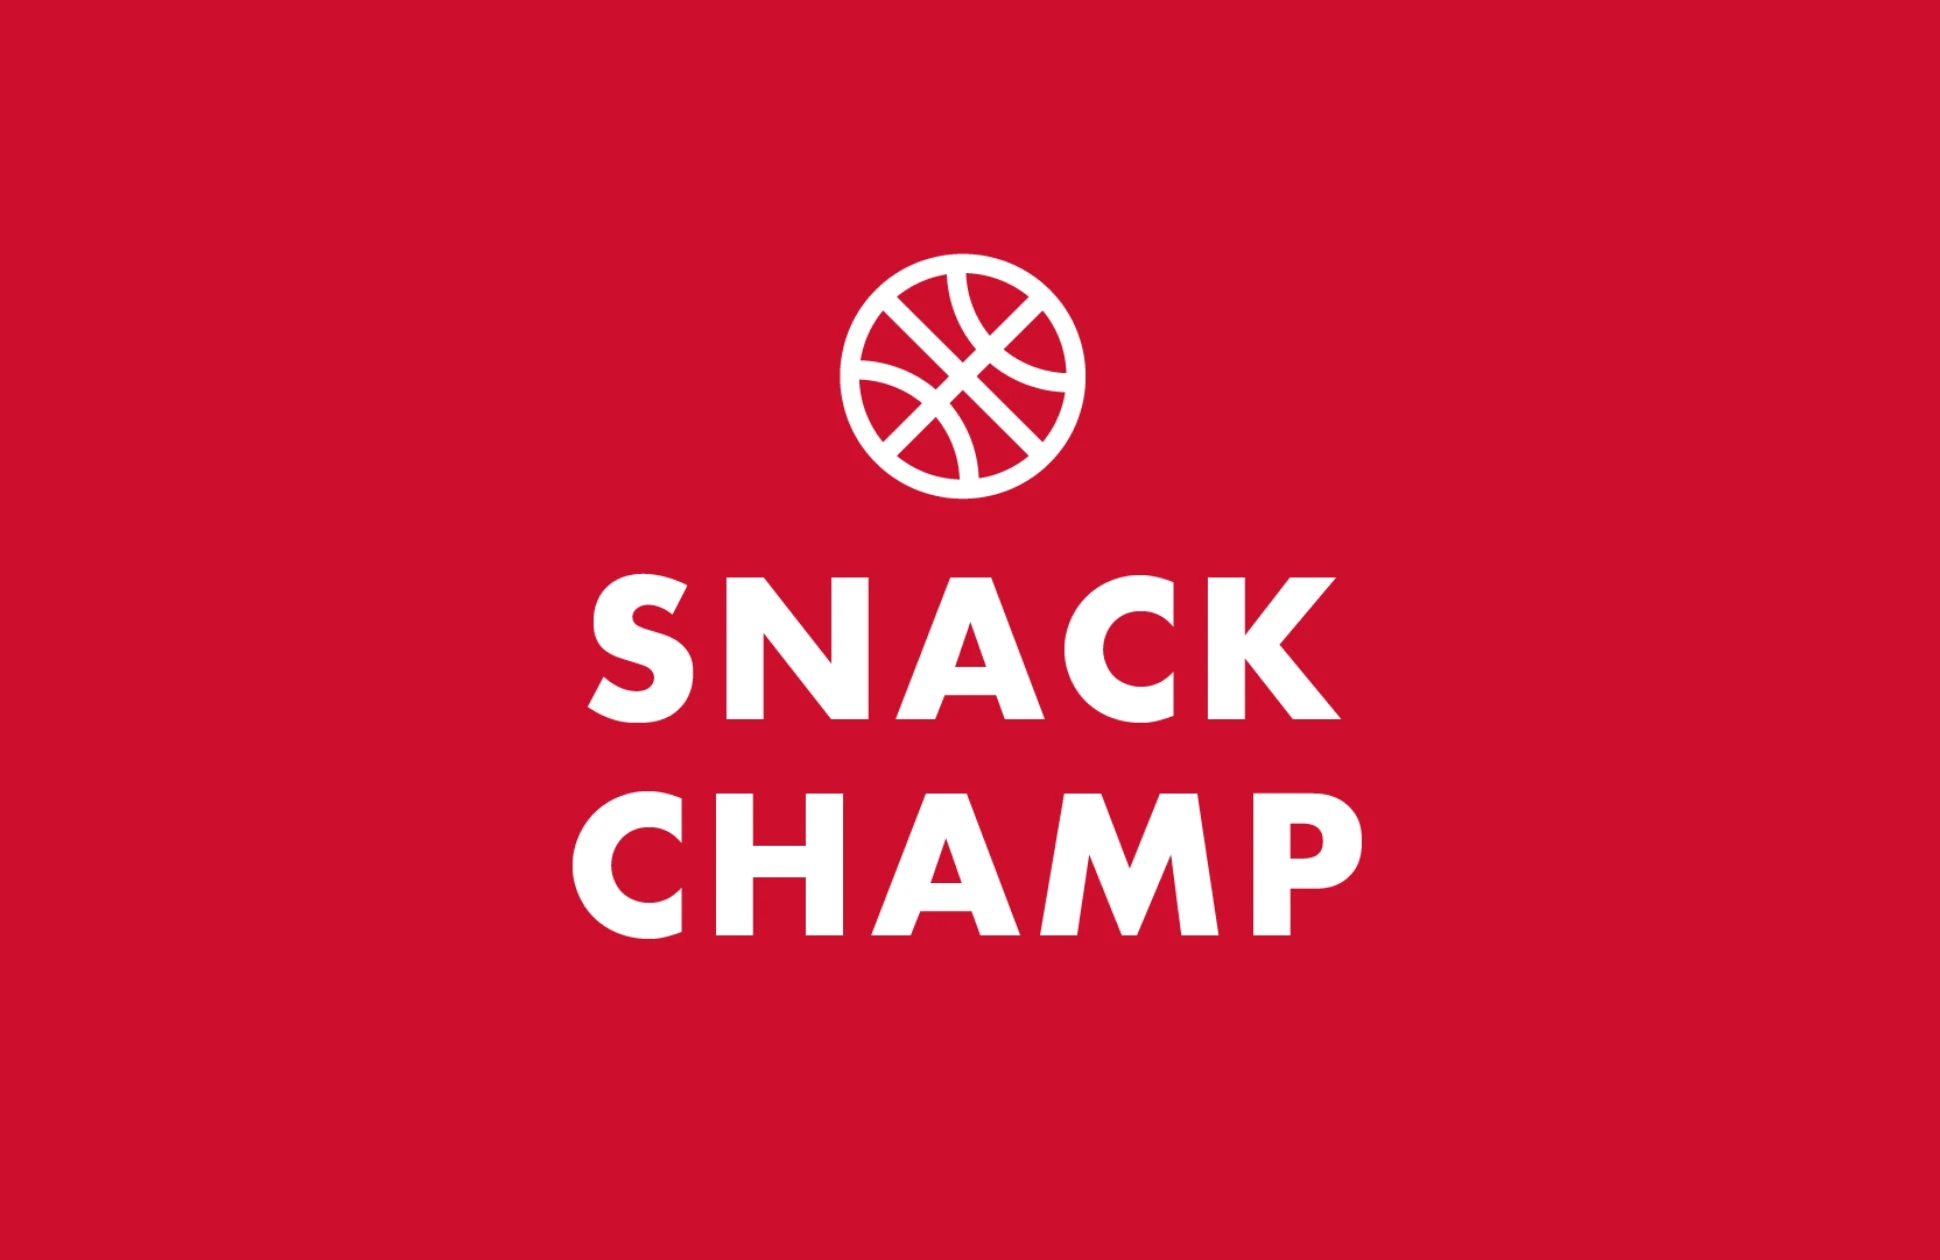 A basketball icon and the words Snack Champ on a red background.